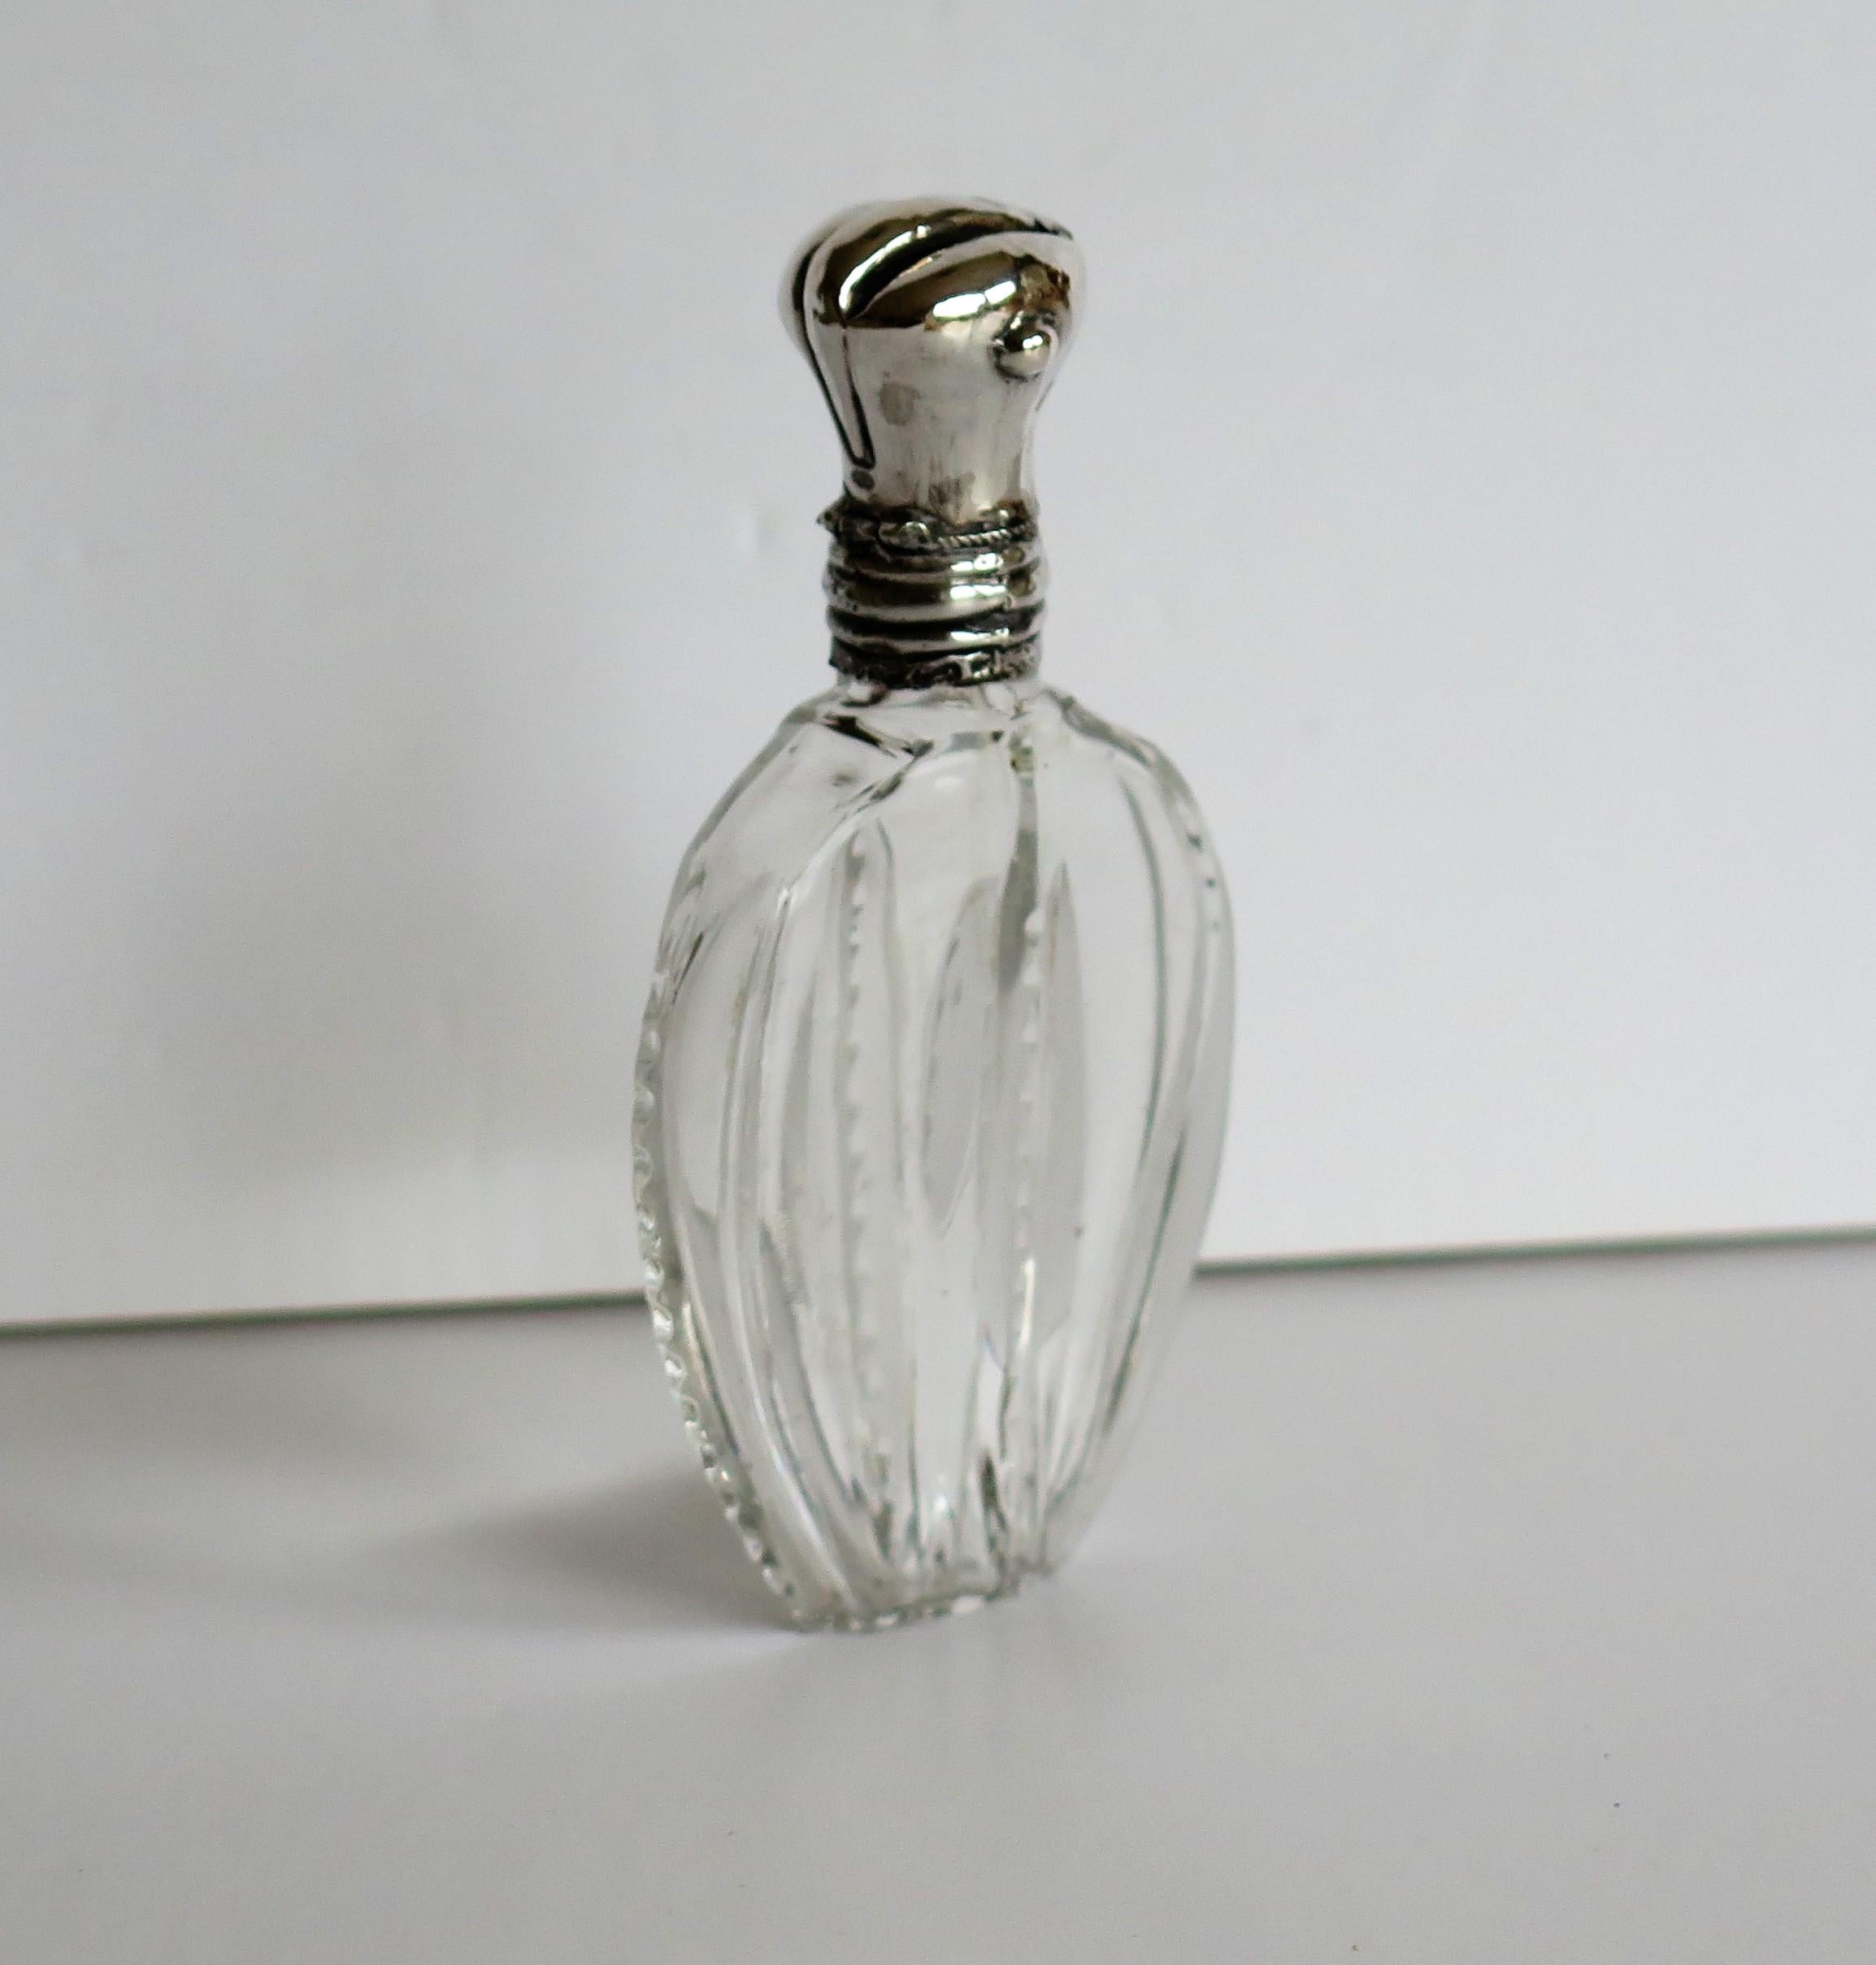 Art Nouveau Cut Crystal Glass Perfume Bottle with Silver Top, French, Late 19th Century